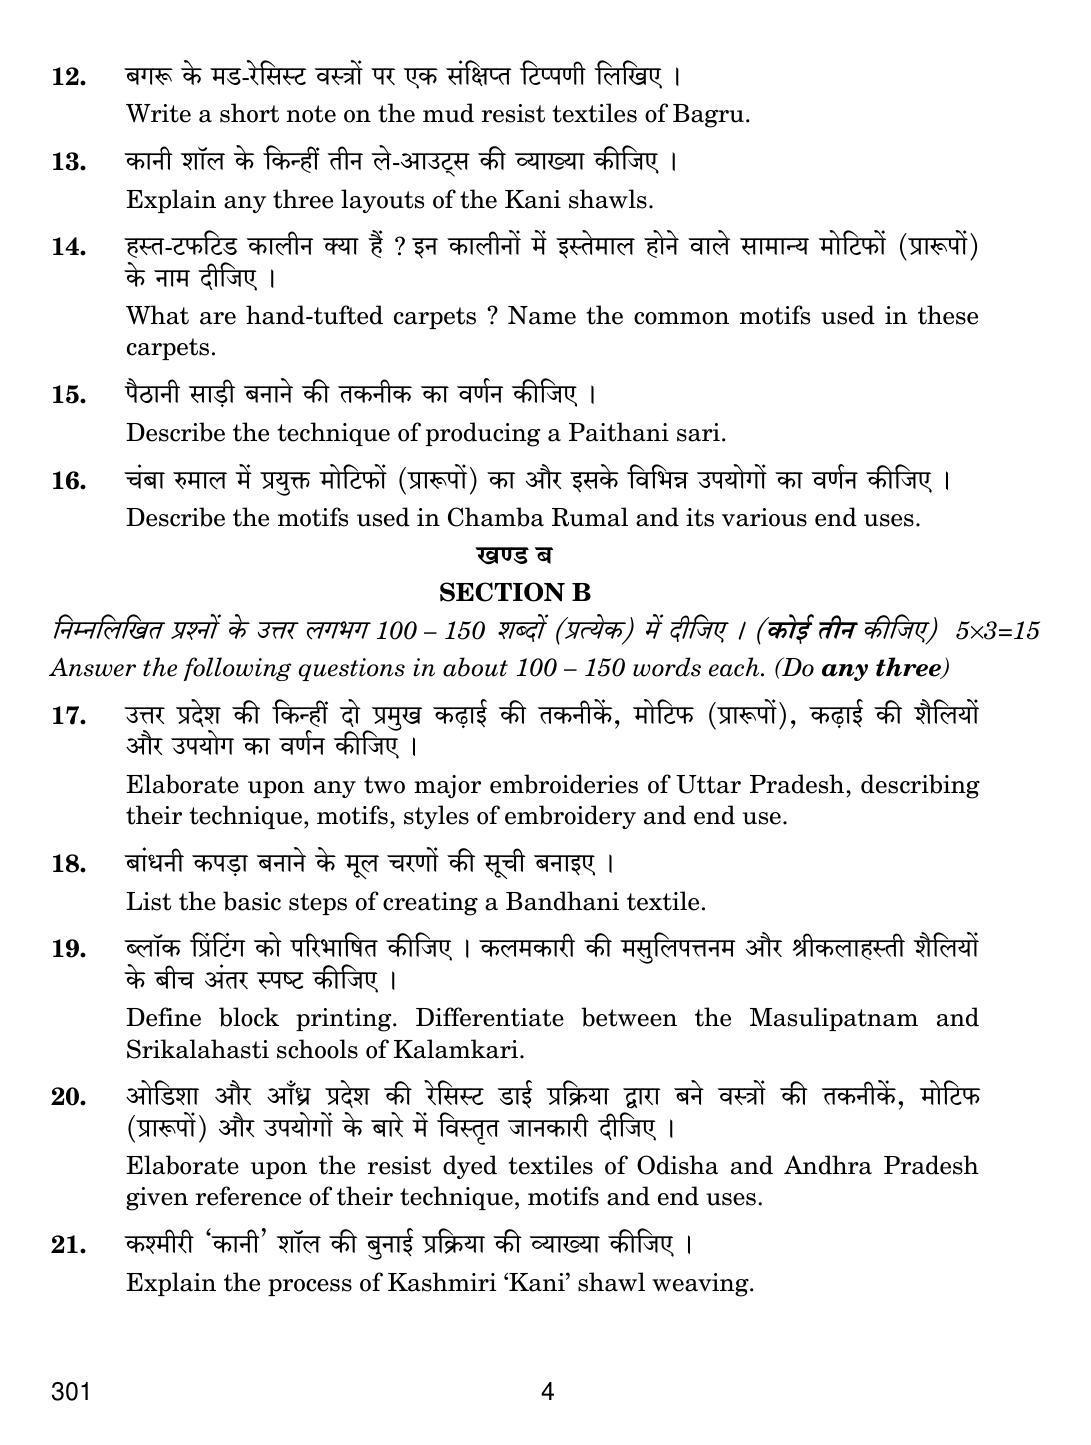 CBSE Class 12 301 Traditional Indian Textiles 2019 Question Paper - Page 4